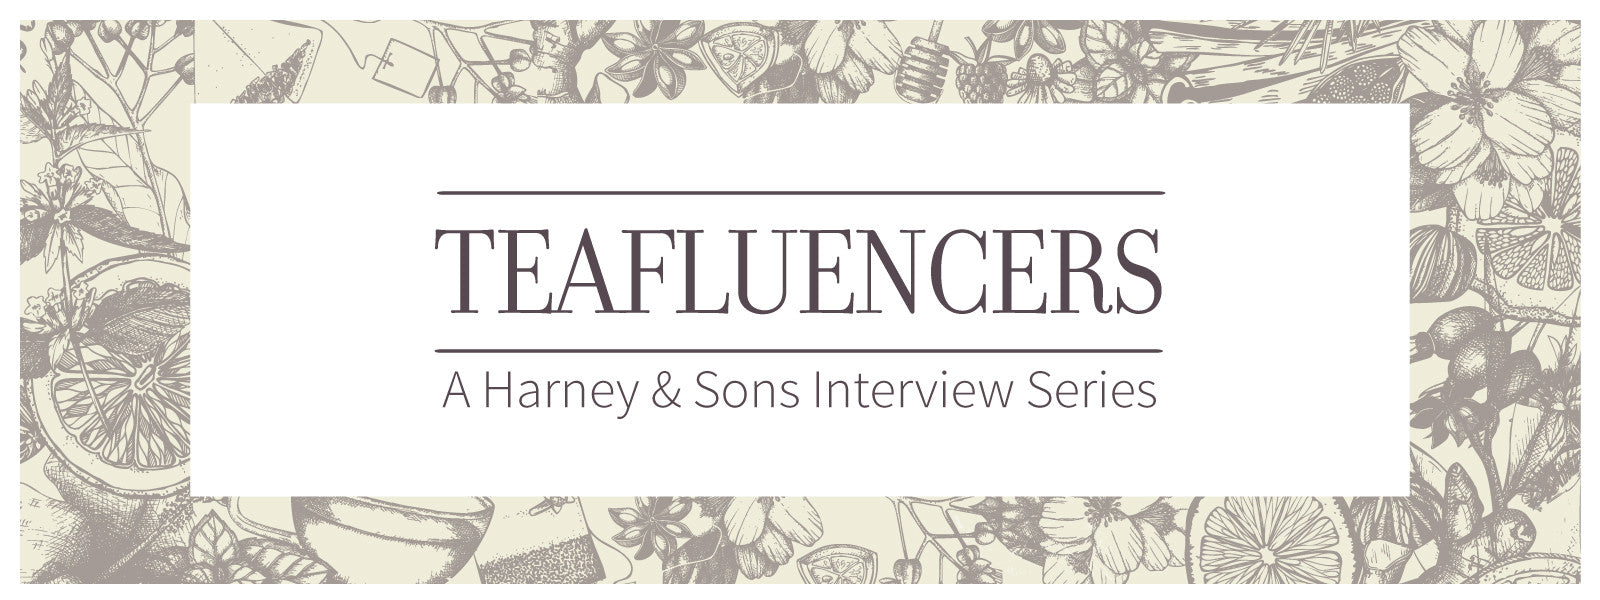 Teafluencers: A Harney & Sons Interview Series